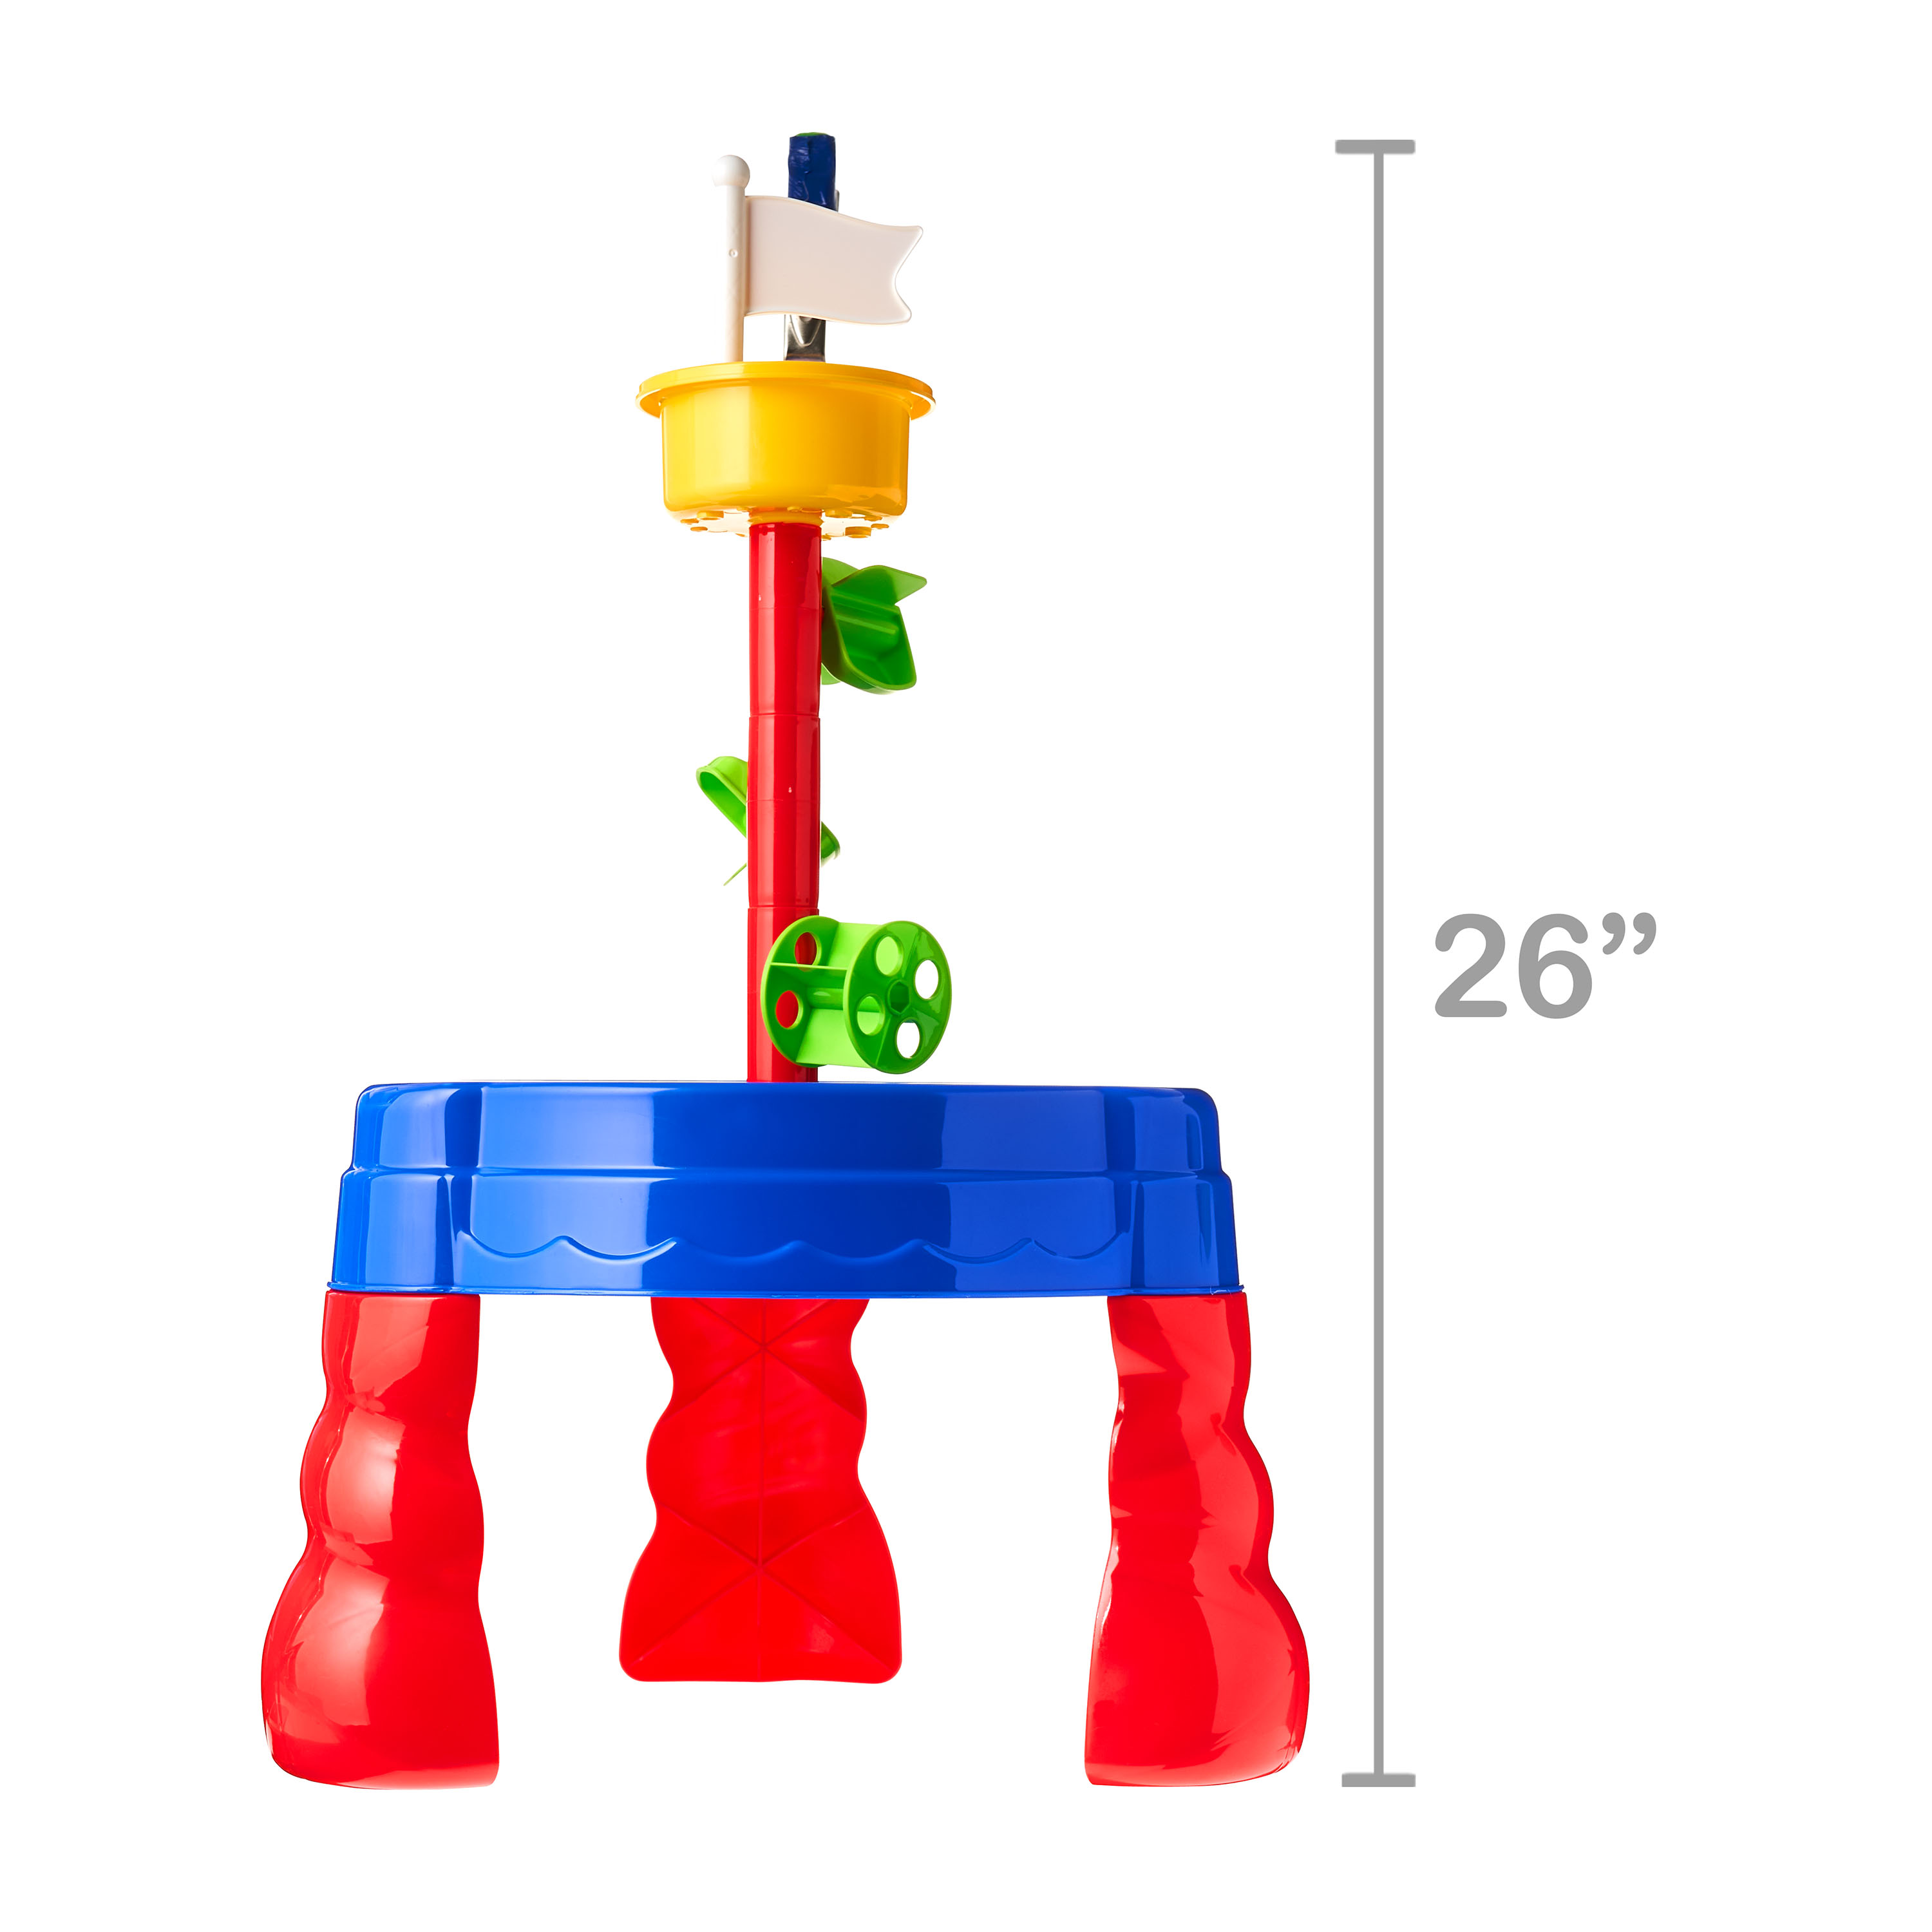 Play Day Sand & Water Table - Creative Toy for Children Ages 3+ - image 5 of 5